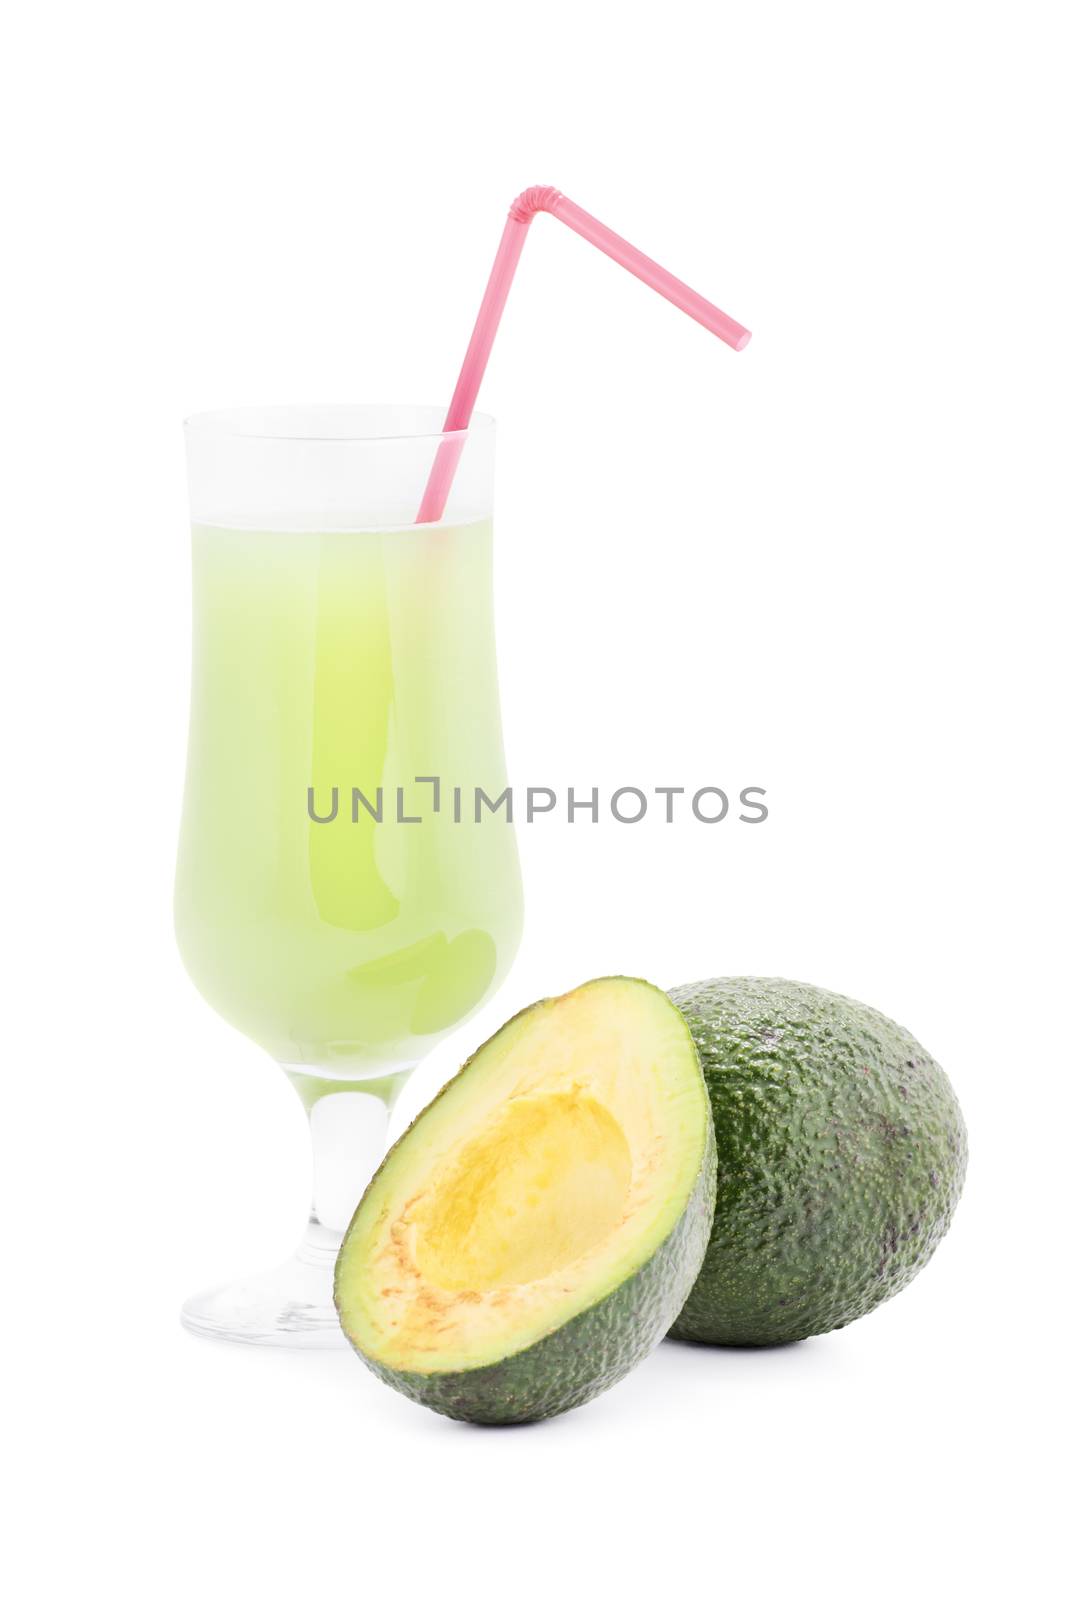 Ripe avocado and a glass of green juice next to it, isolated on white background.